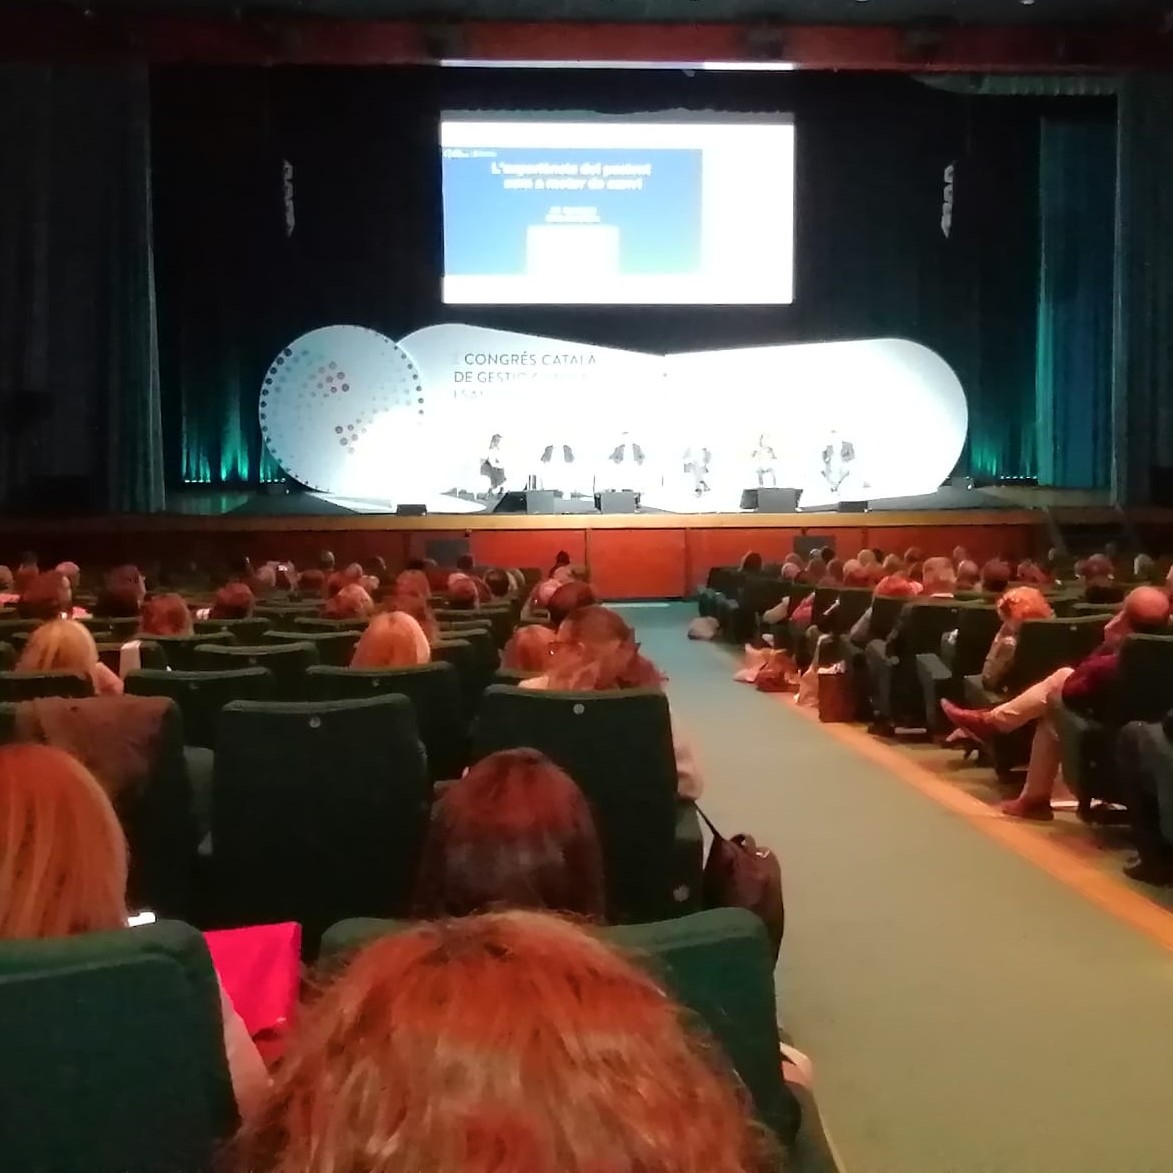 Health infrastructures present at the 1st Catalan Congress on Clinical and Health Management